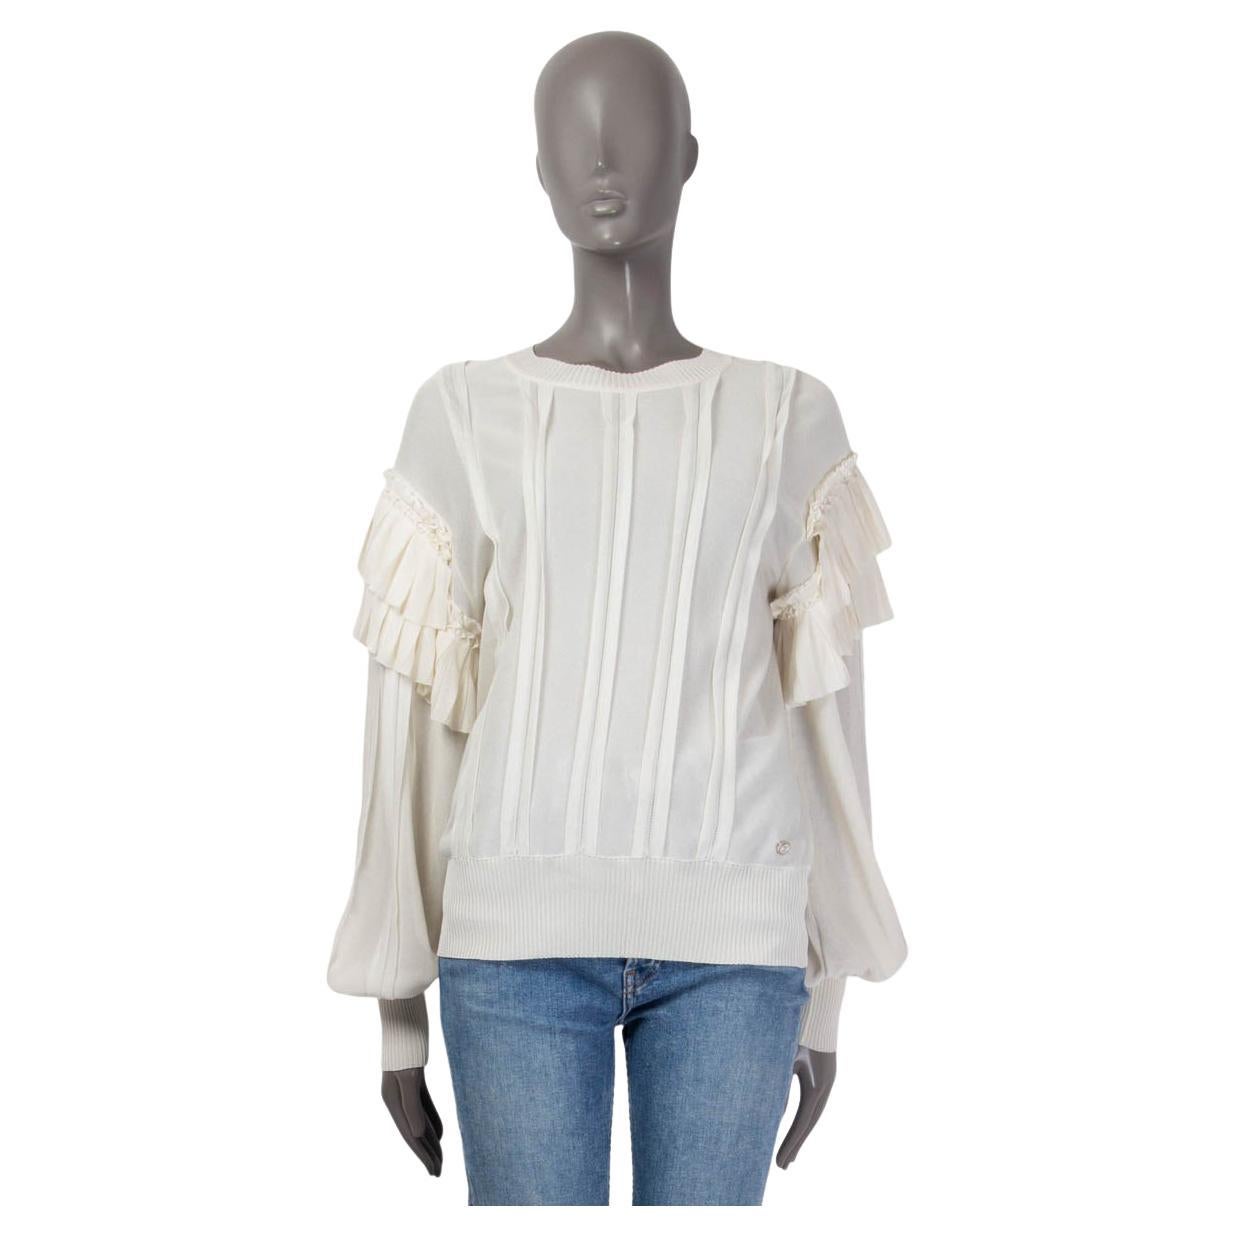 Pull CHANEL blanc ivoire 2018 RUFFLED 38 S